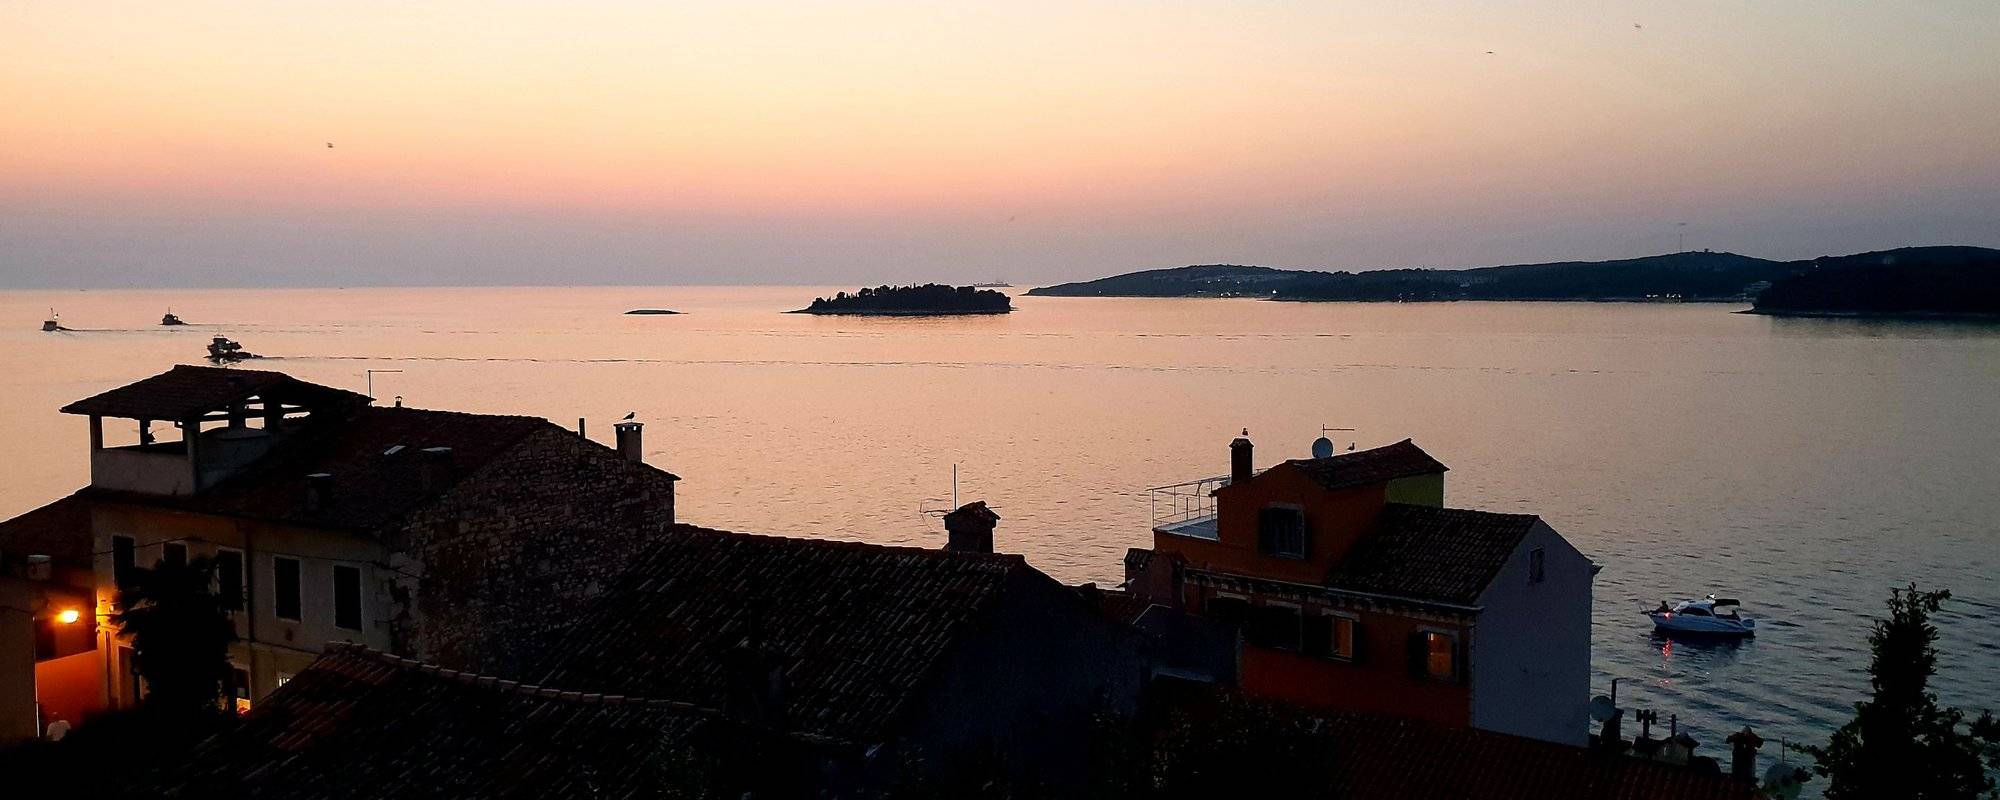 Magnificent Rovinj, Croatia - remembering the days of freedom